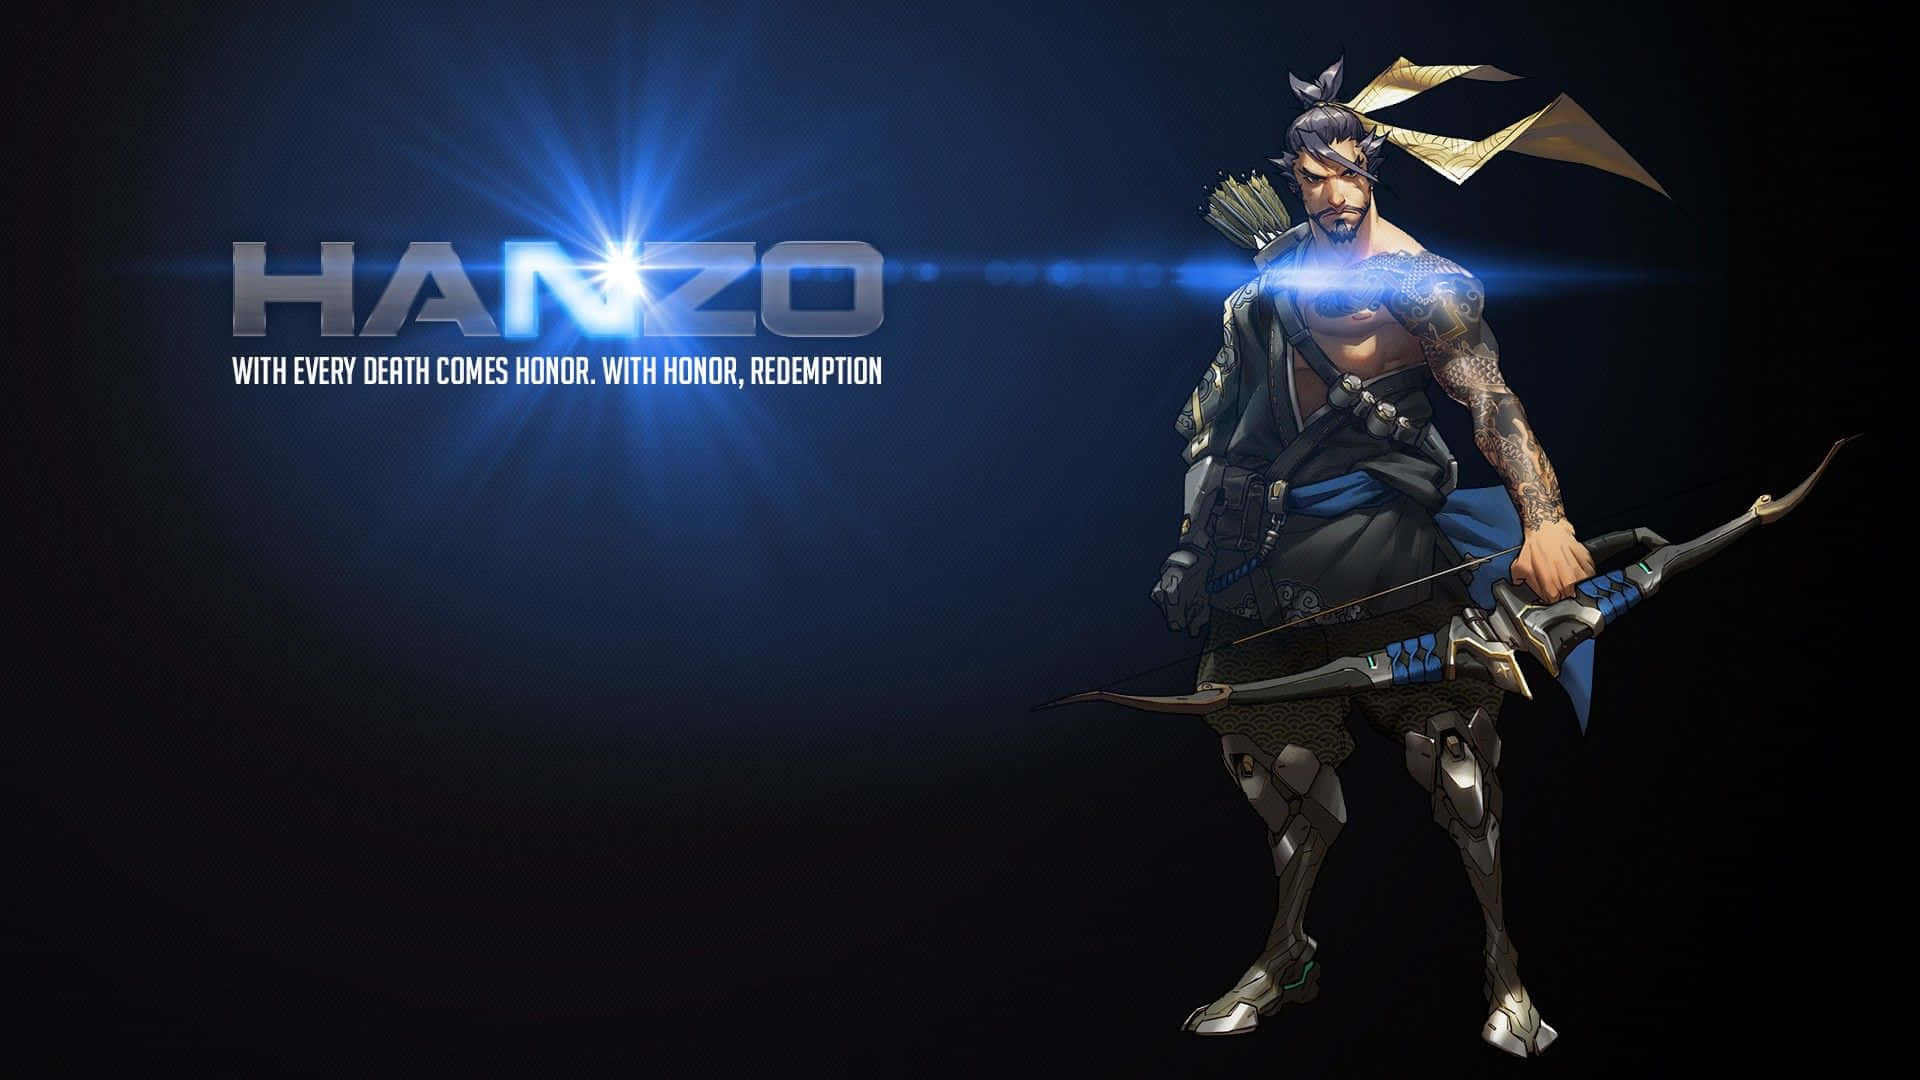 Masterful Hanzo In Action On Overwatch Game Wallpaper